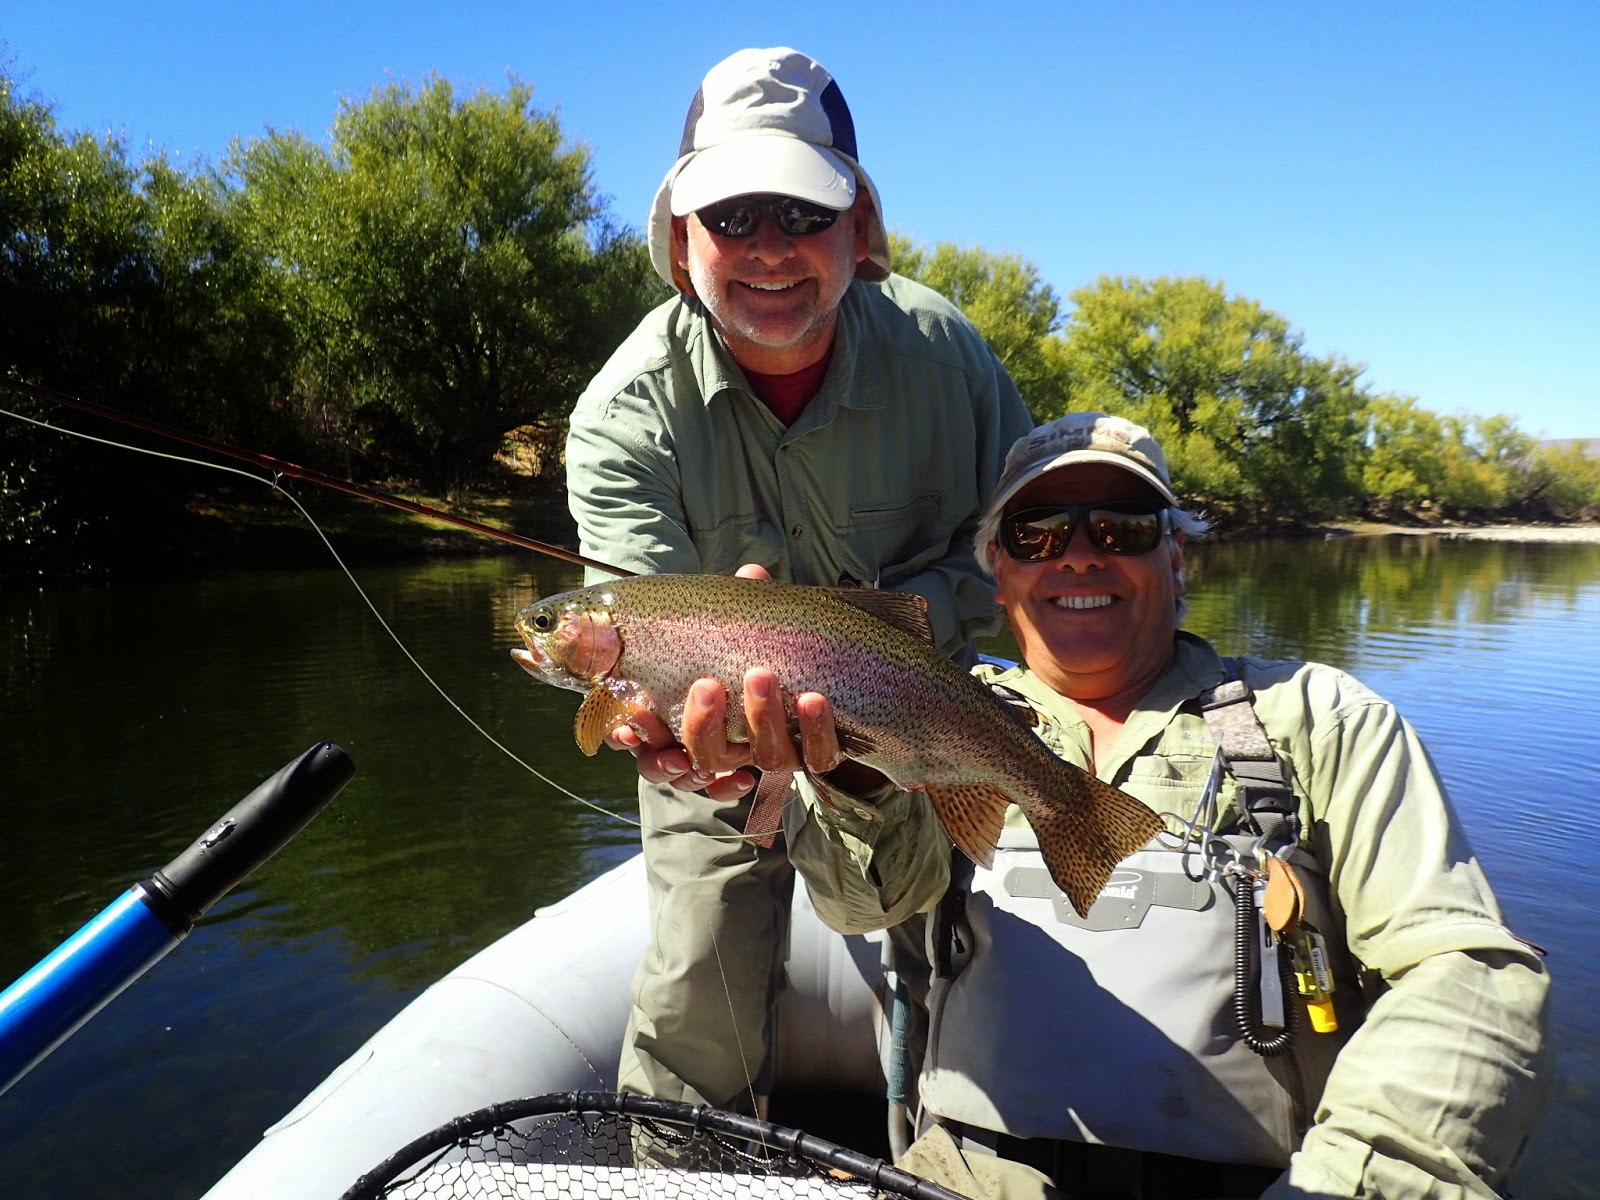 First Cast Fly Fishing: DIY Fly Fishing Patagonia Argentina: Foul